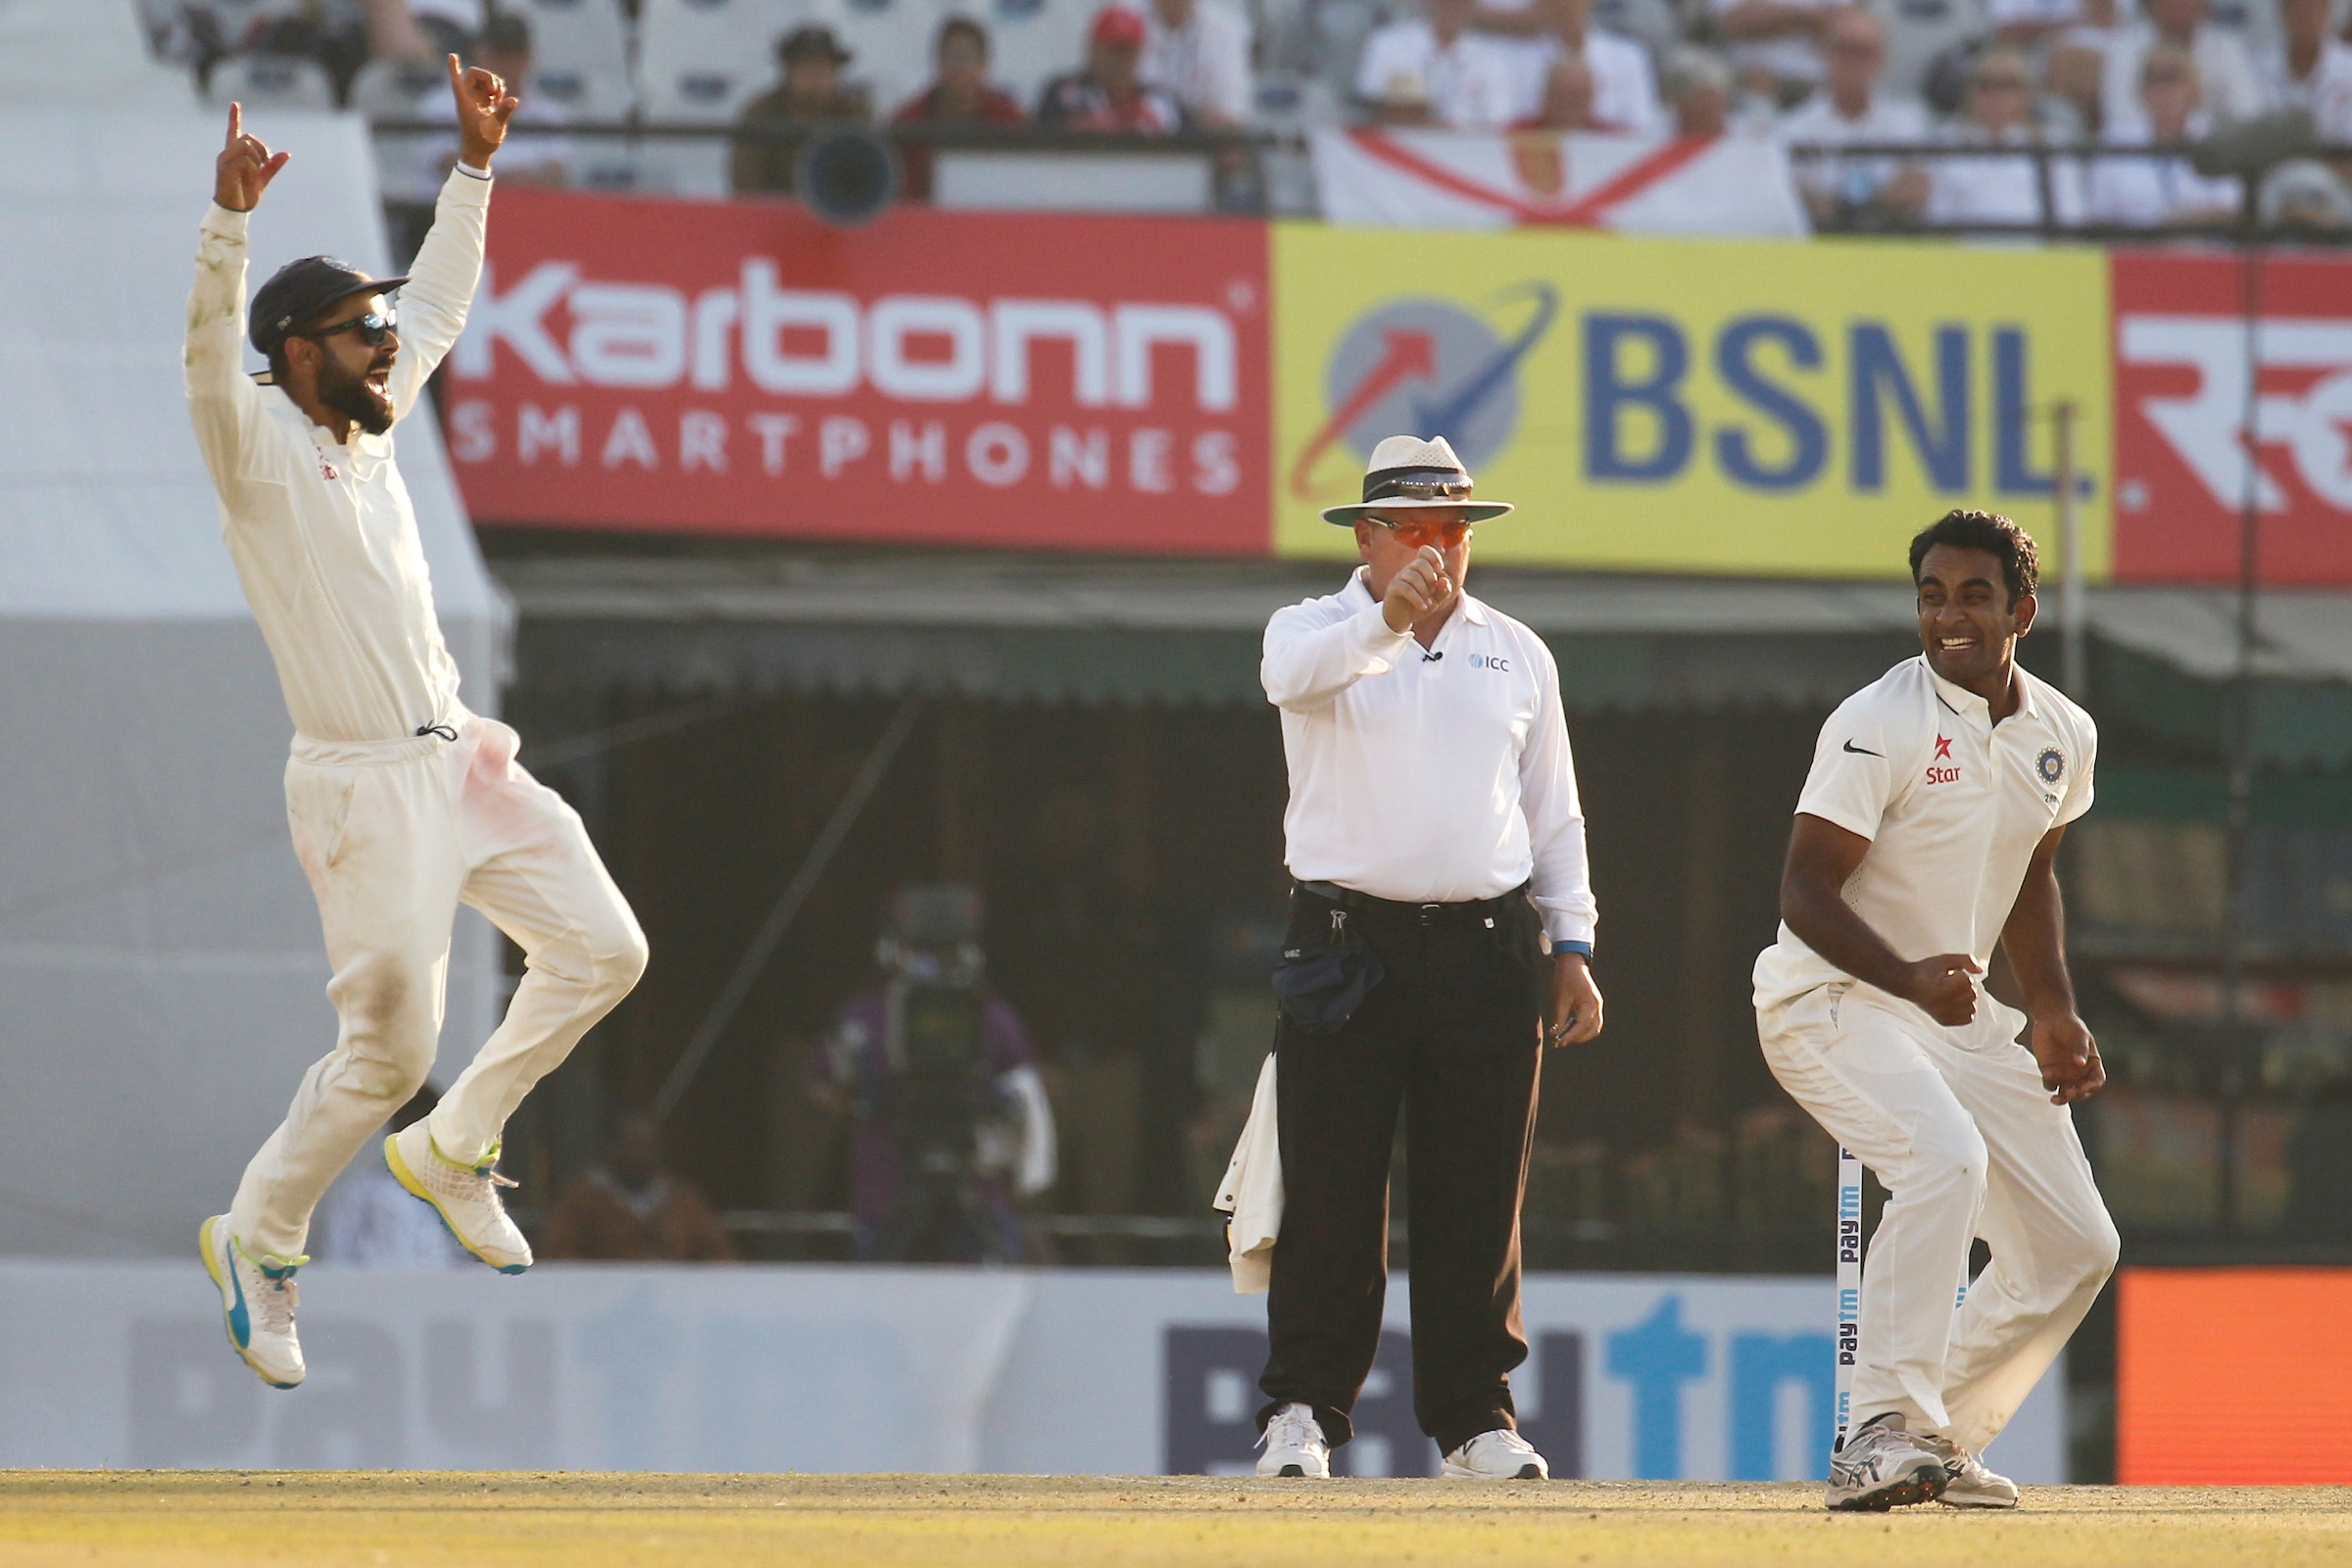 Photo : 3rd Test: Spinners Put India in Command vs England on Day 1 at Mohali